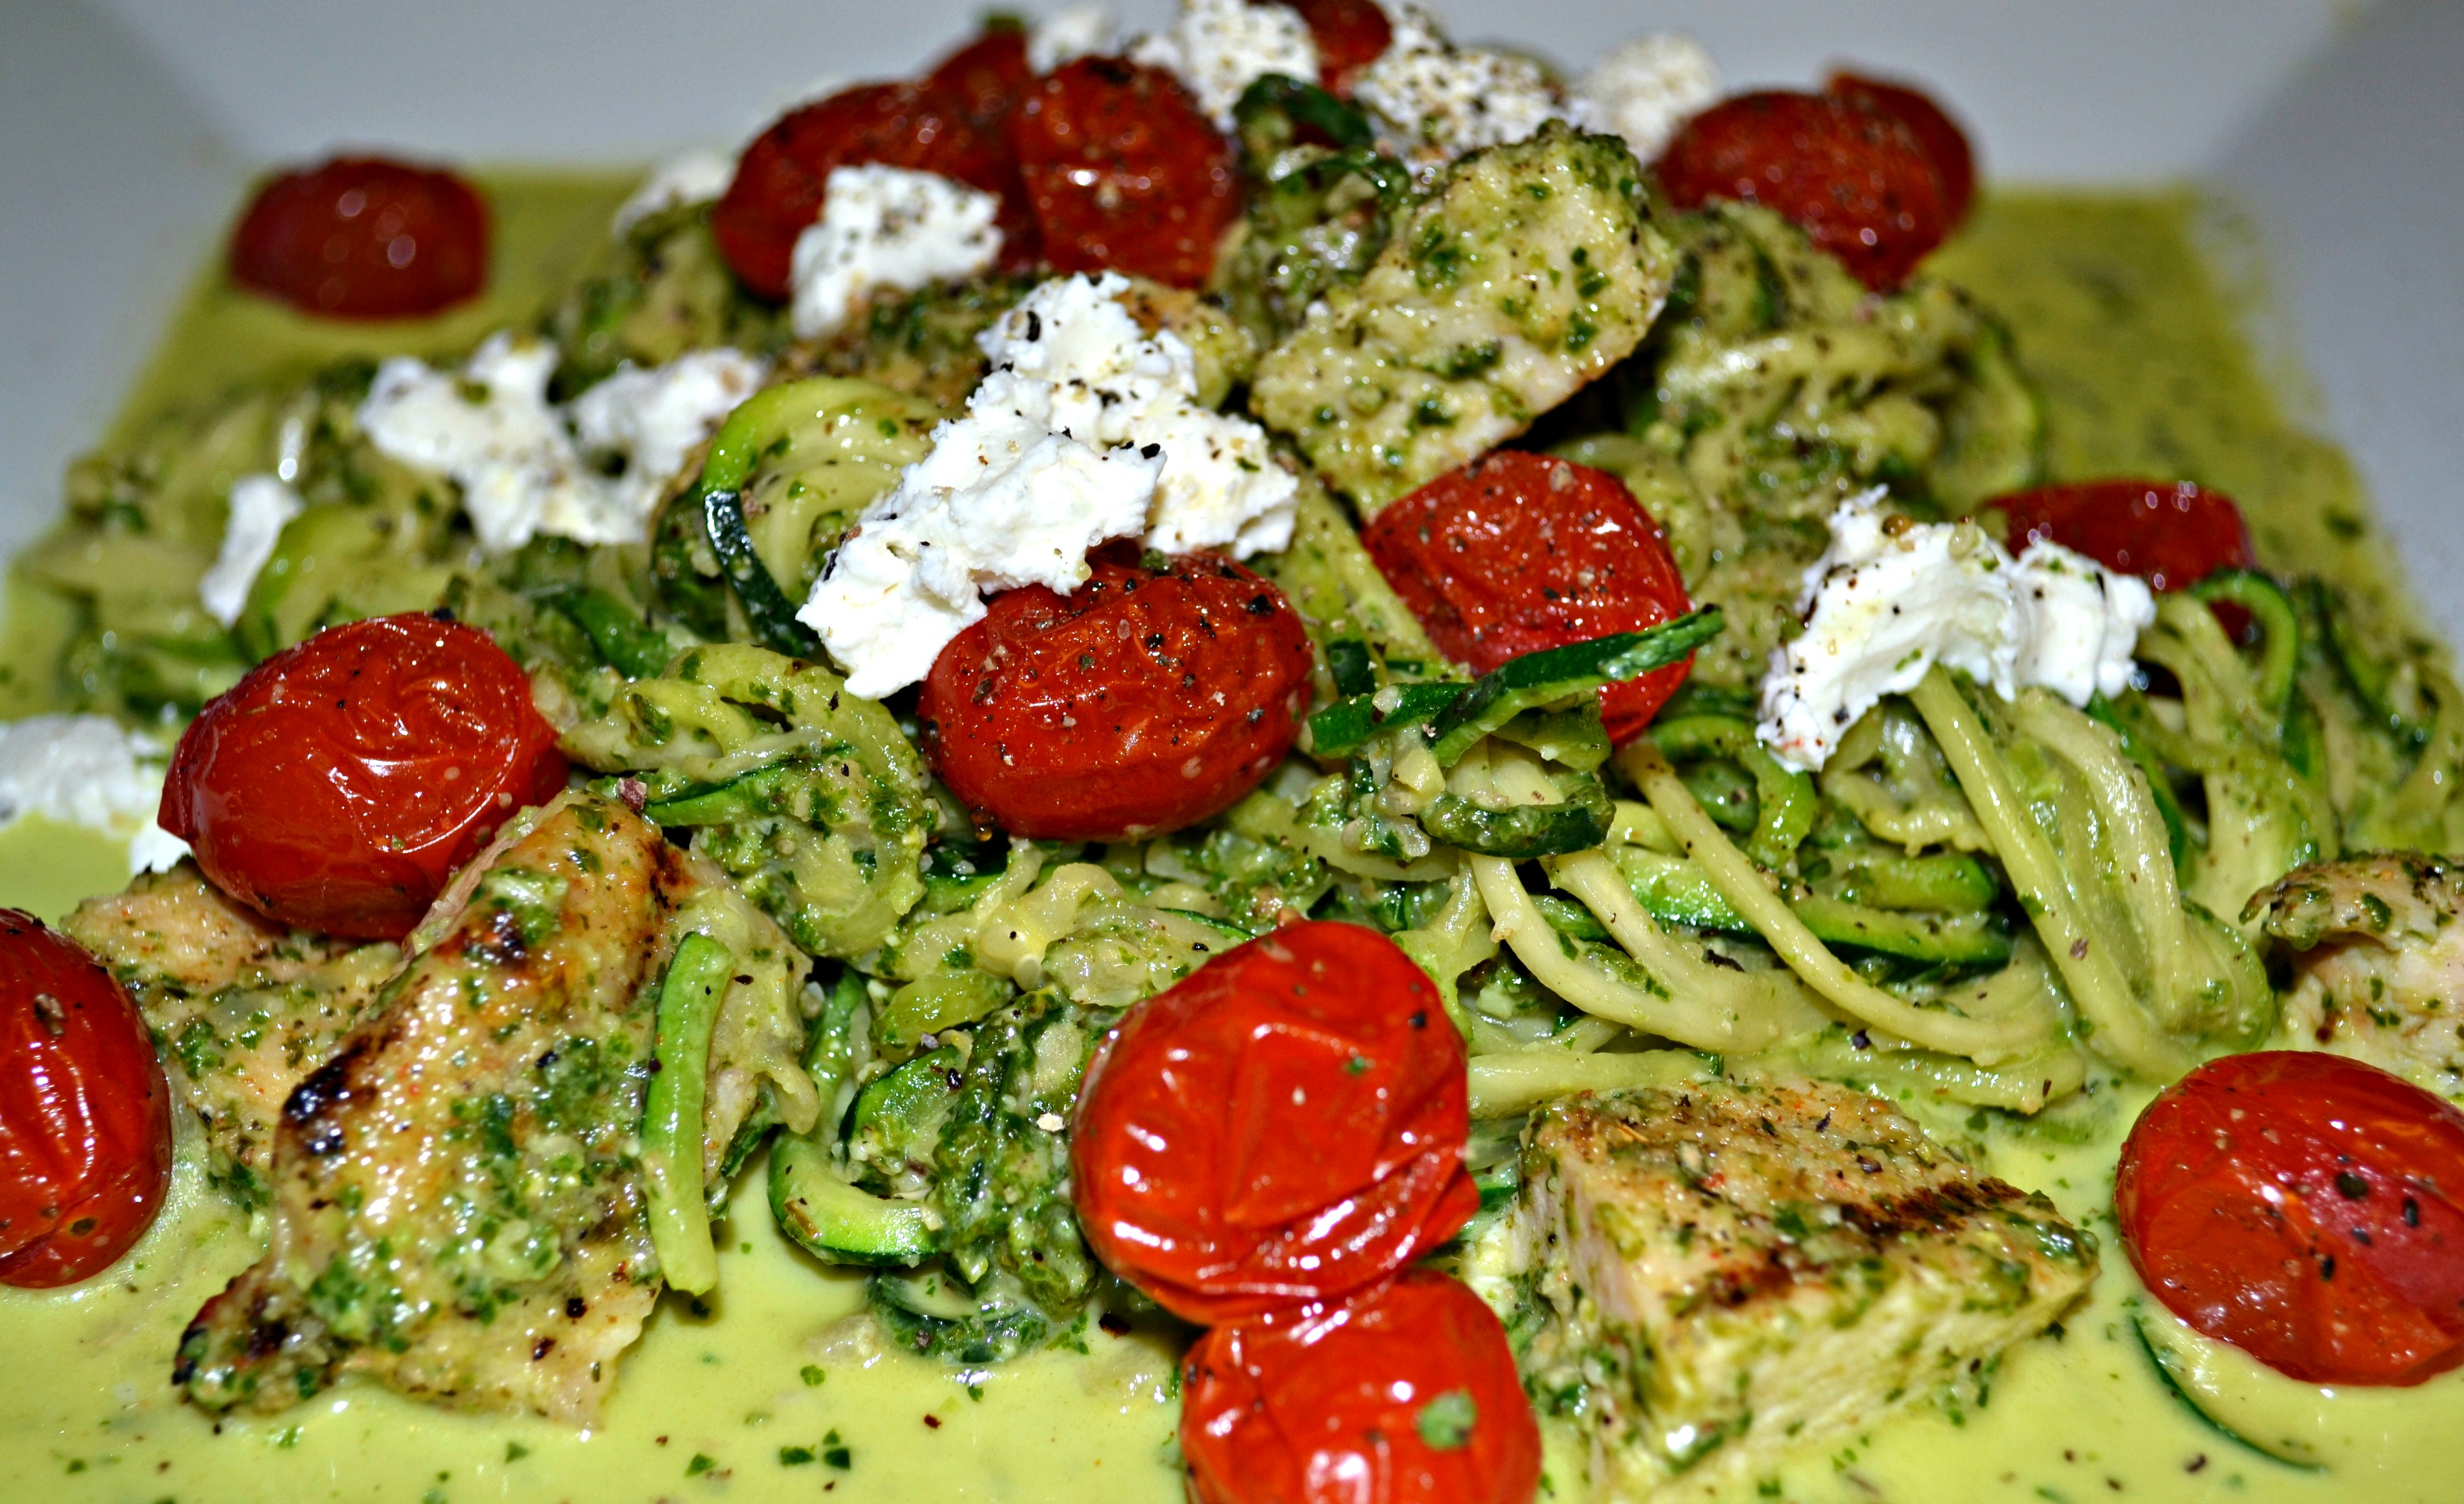 Basil Pesto and Goat Cheese “Pasta” with Grilled Chicken and Roasted Tomatoes